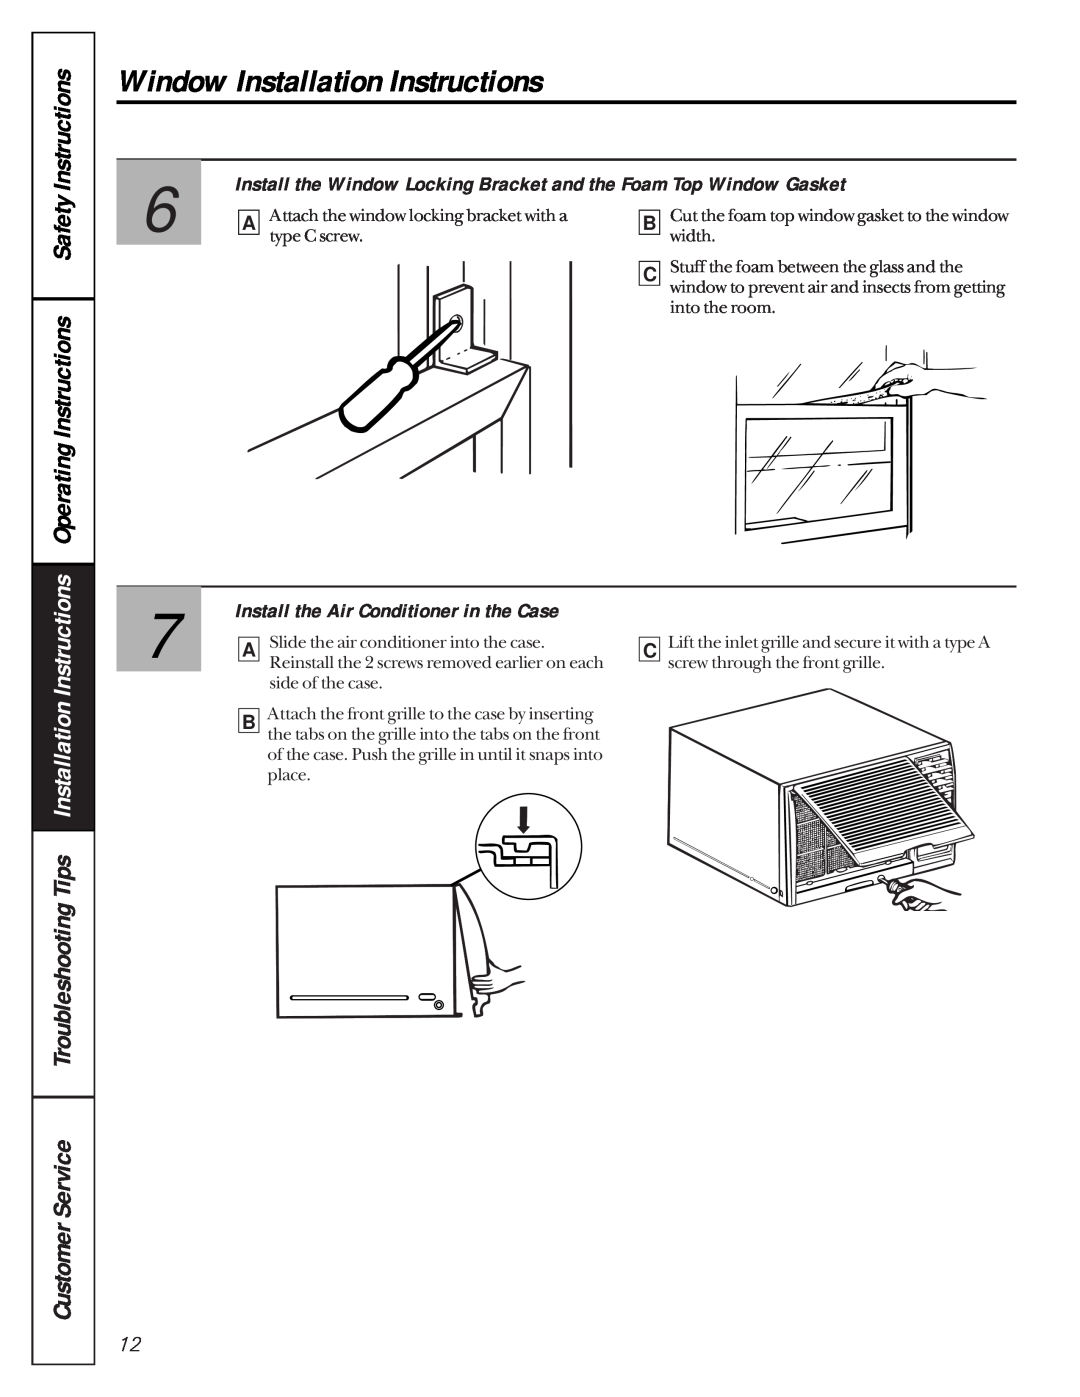 GE AGH08 OperatingInstructions SafetyInstructions, TroubleshootingTips Installation Instructions, CustomerService 